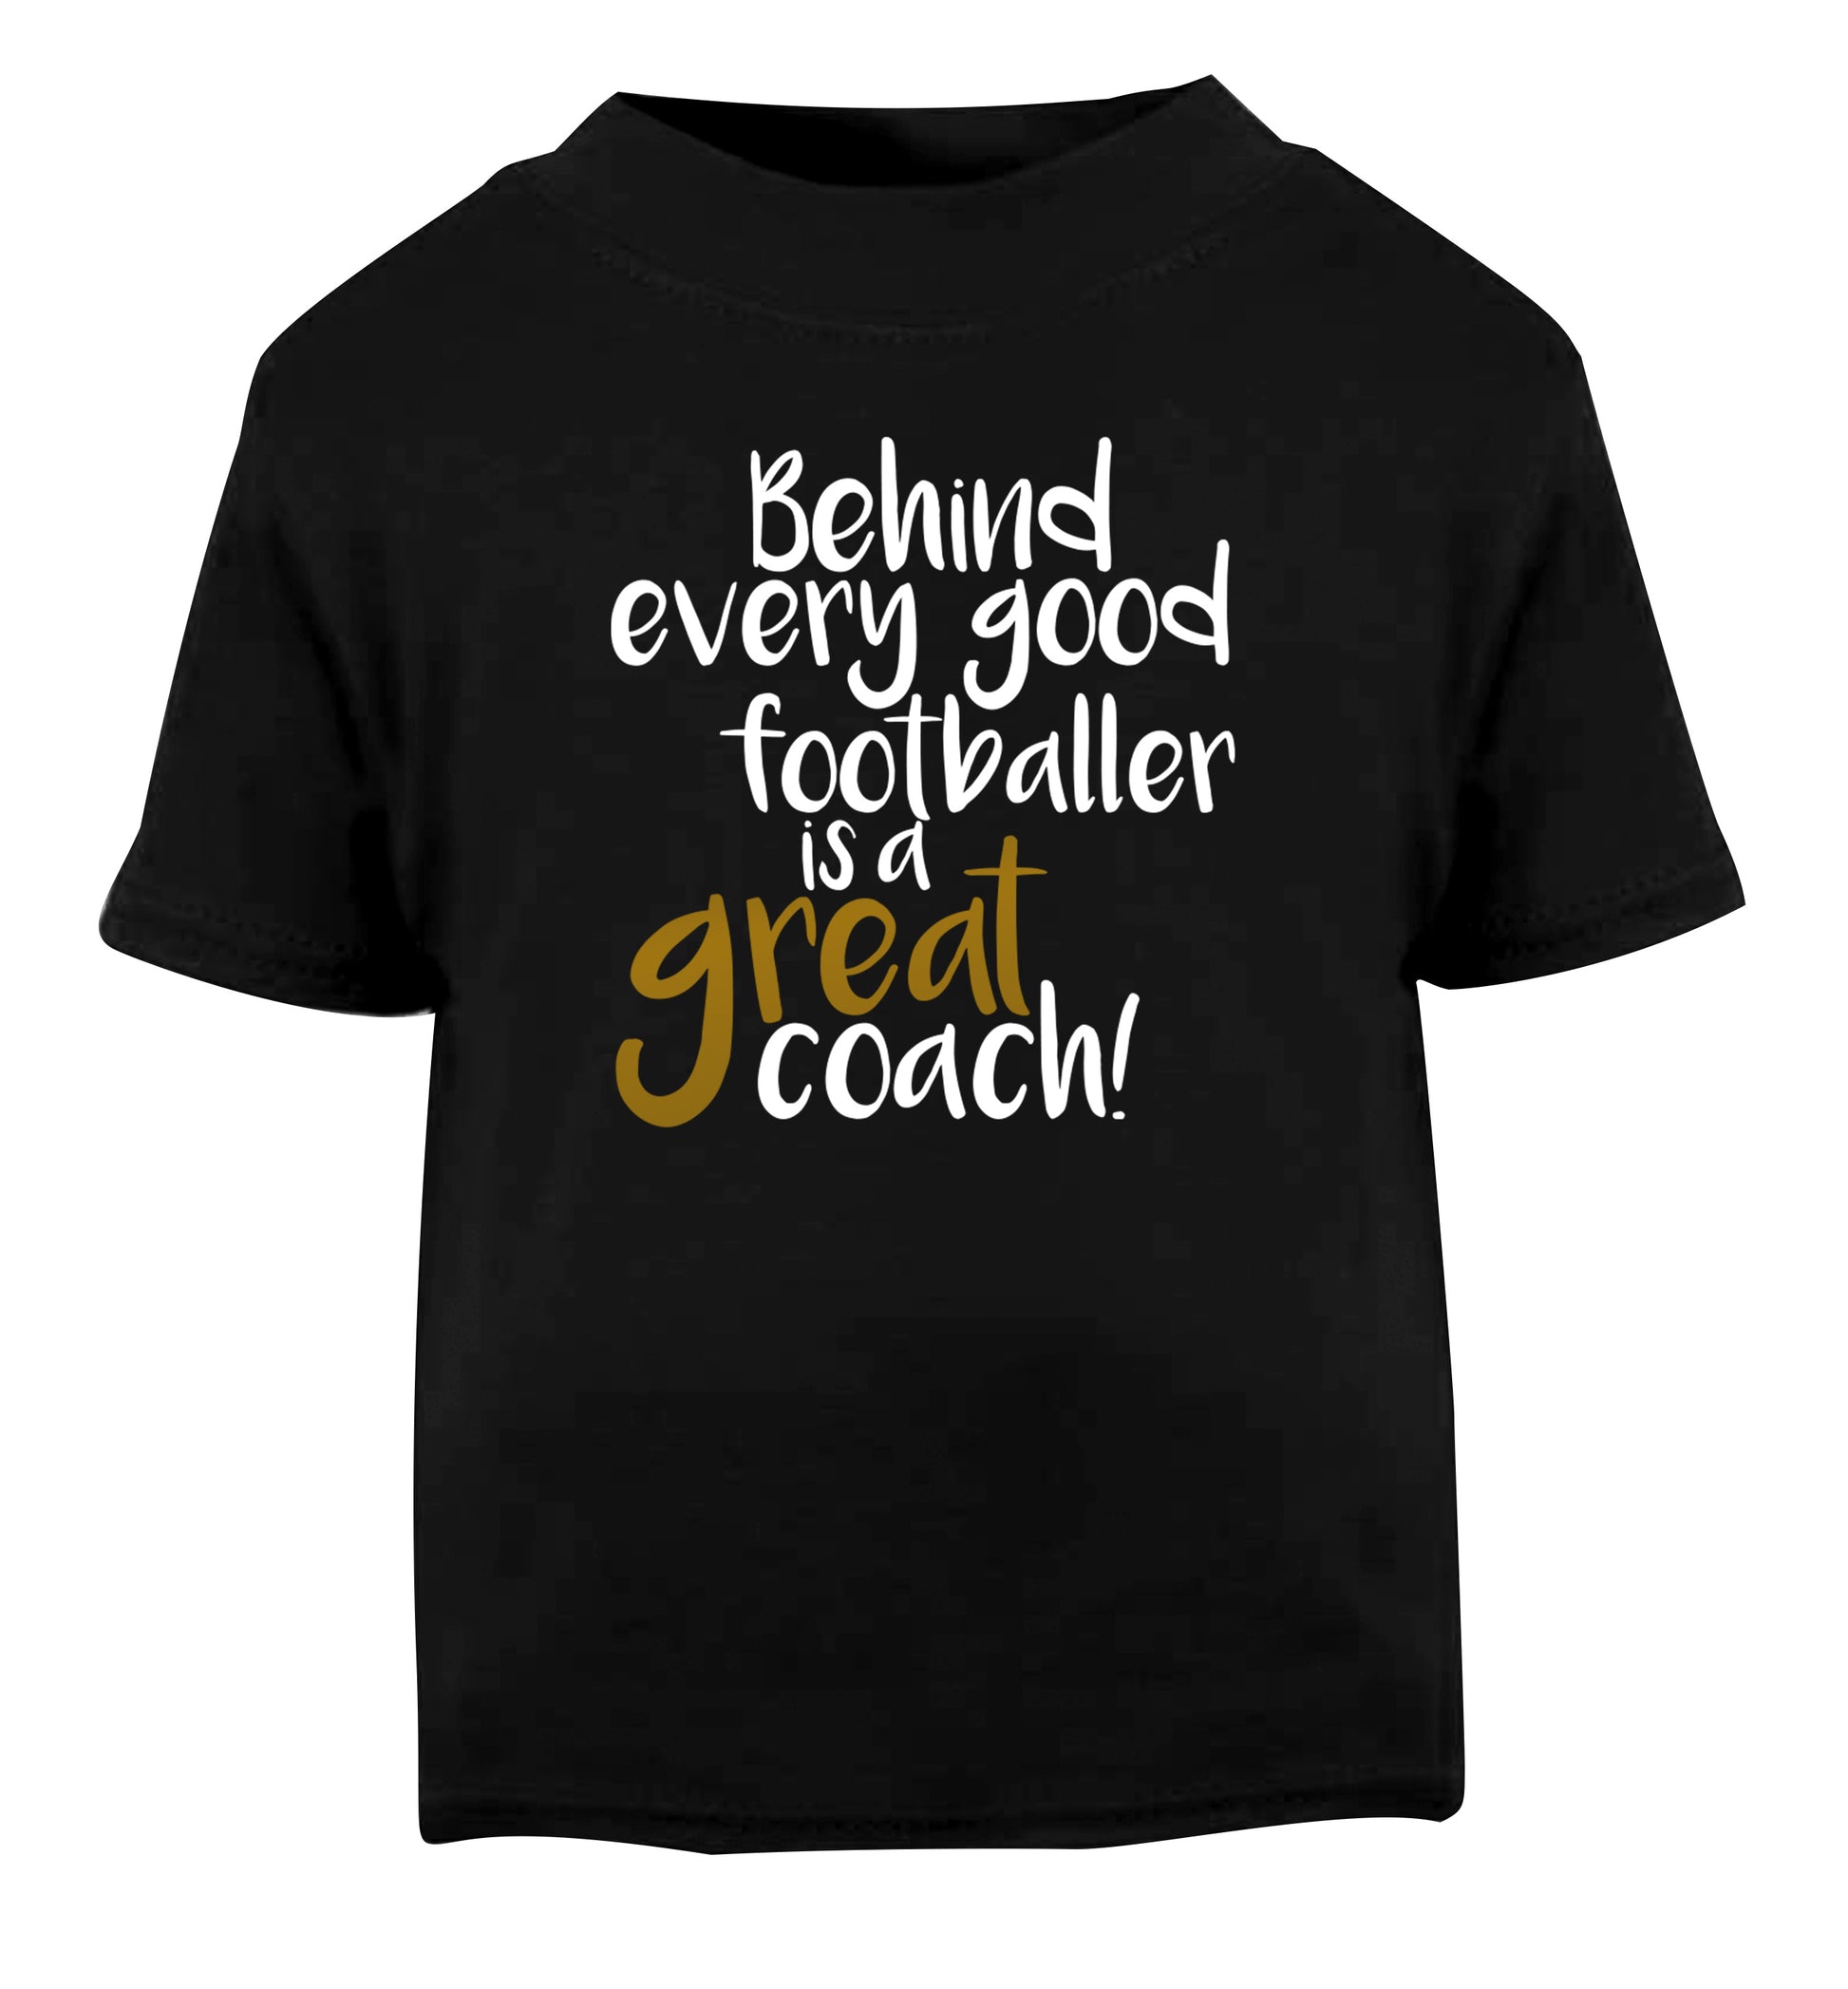 Behind every good footballer is a great coach! Black Baby Toddler Tshirt 2 years